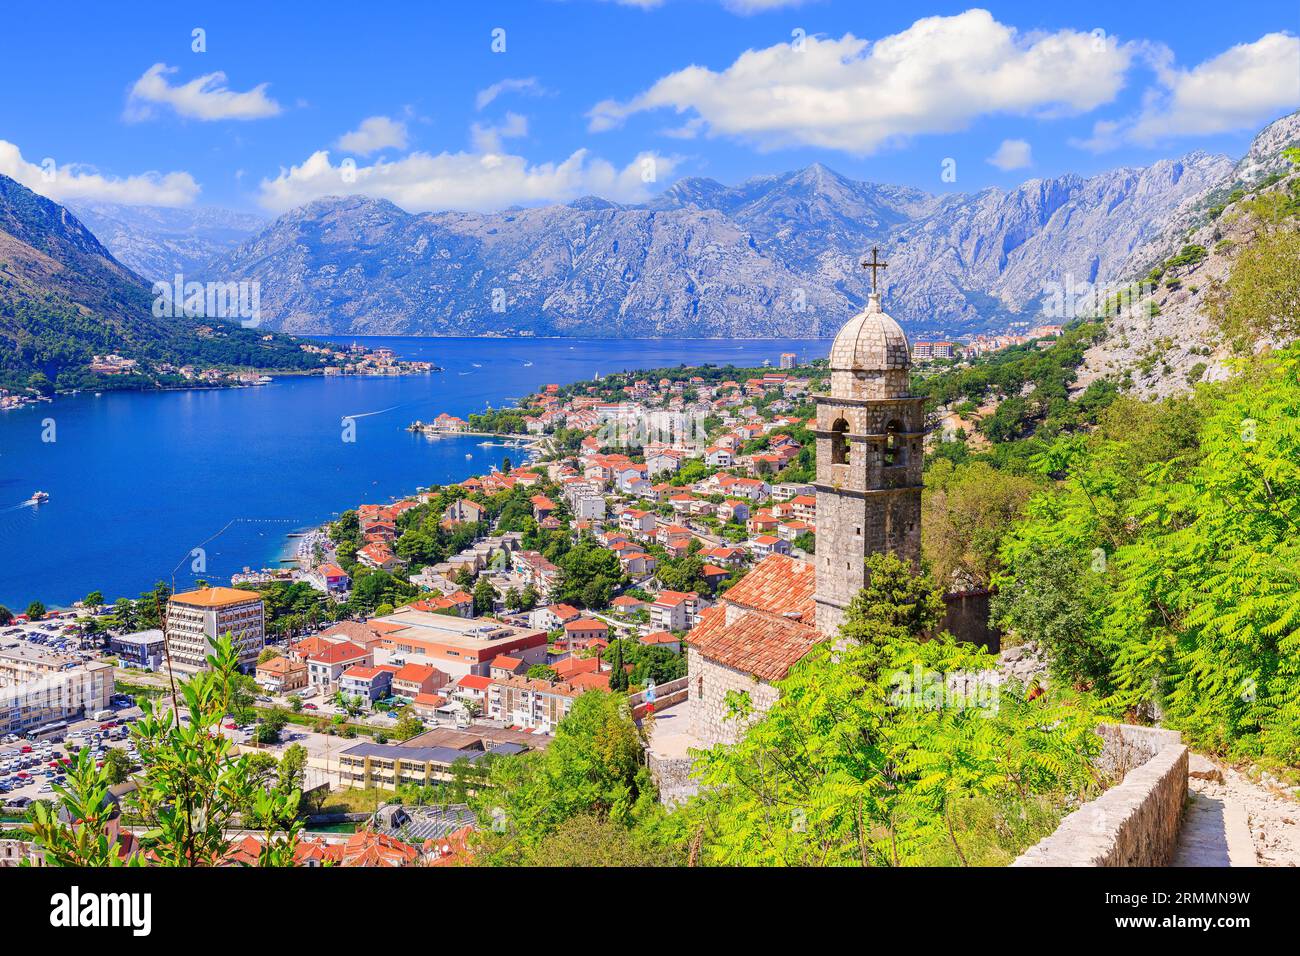 Kotor bay and Old Town from Lovcen Mountain. Montenegro. Stock Photo